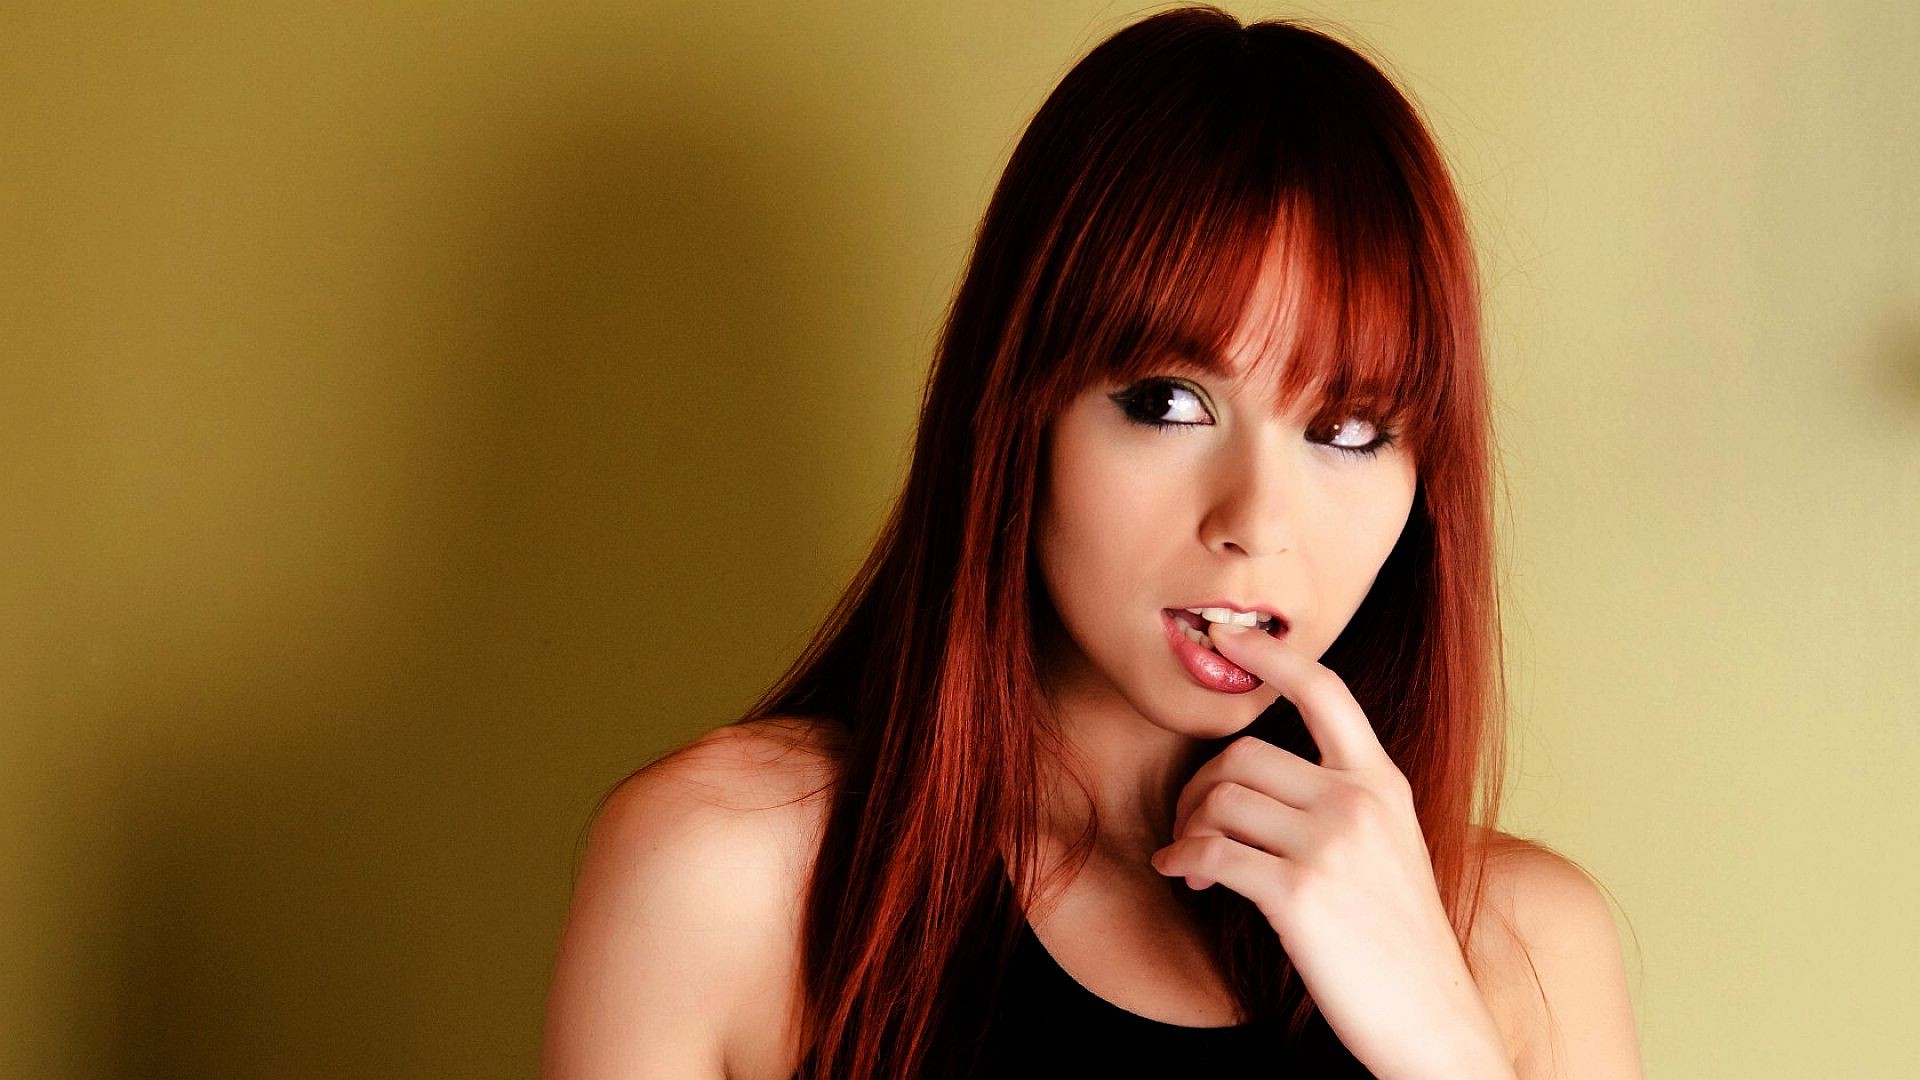 Ariel Rebel, Redhead Wallpapers HD / Desktop and Mobile Backgrounds.